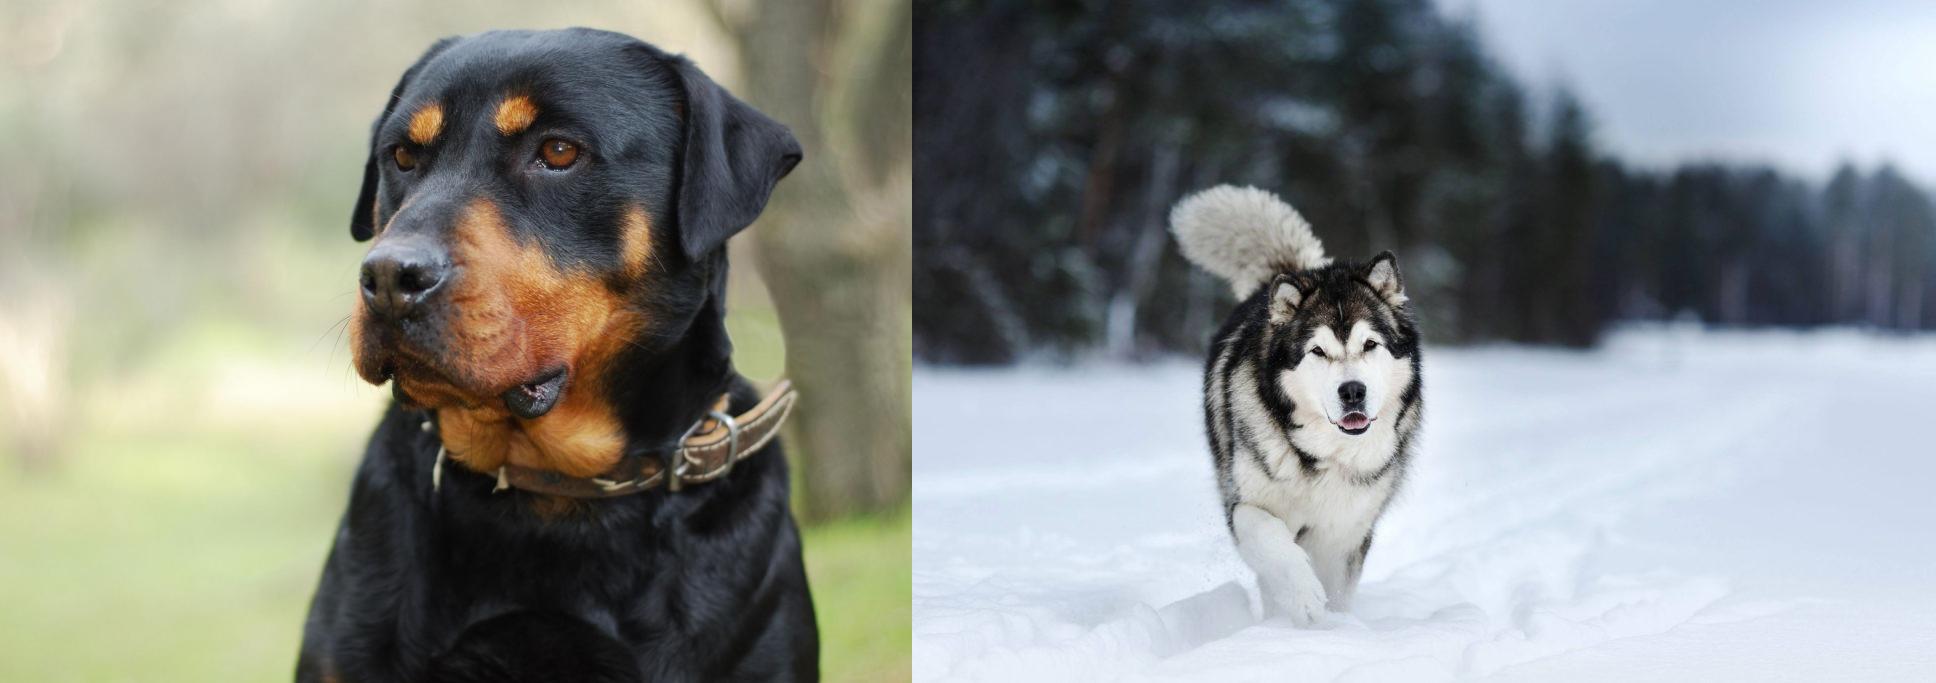 Rottweiler is originated from Germany but Siberian Husky is originated from...